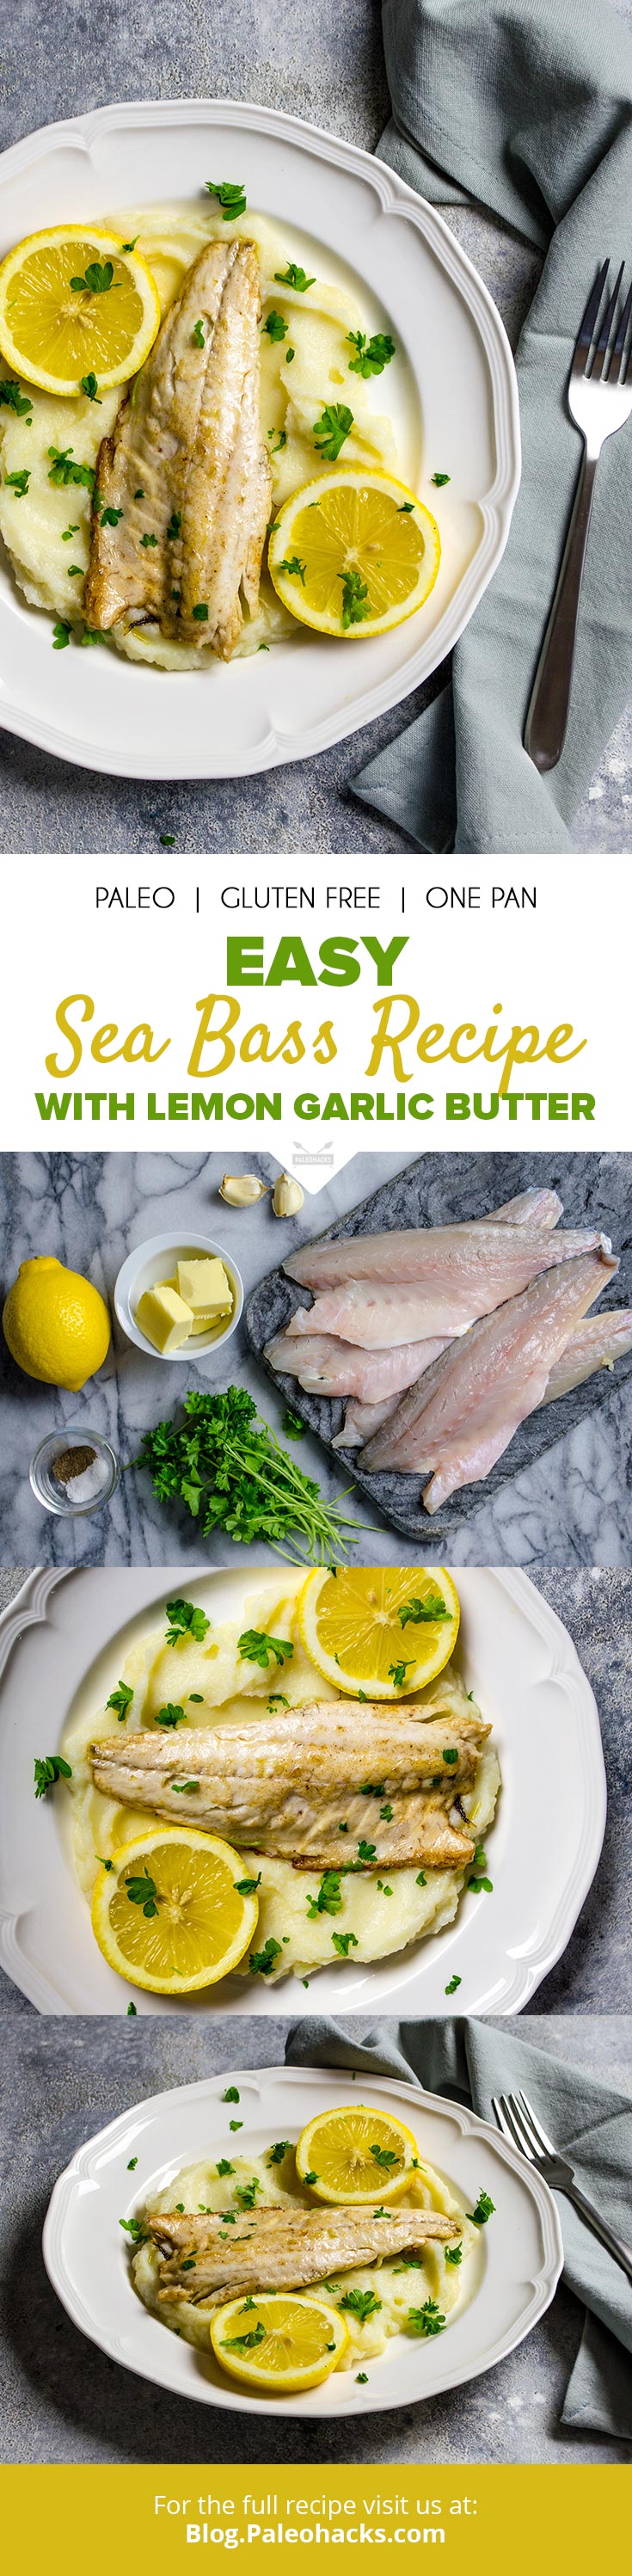 Flaky, pan-roasted sea bass fillets topped with an easy lemon garlic butter sauce. You're just 5 ingredients away from this pan-seared lemon garlic sea bass.